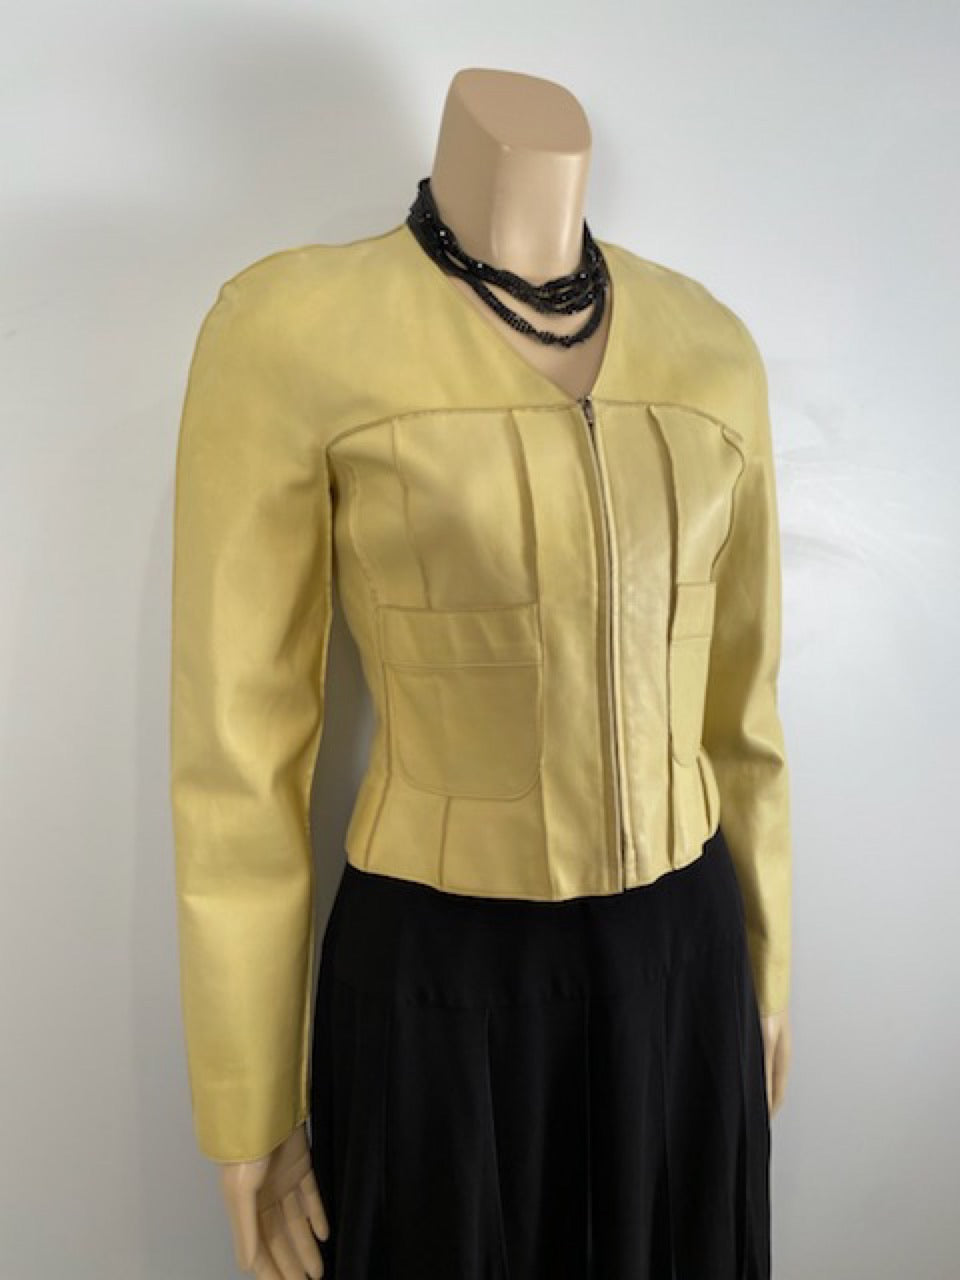 HelensChanel Vintage Chanel 99P, 1999 Spring Yellow Soft Lambskin Leather Jacket FR 34 US 2/4